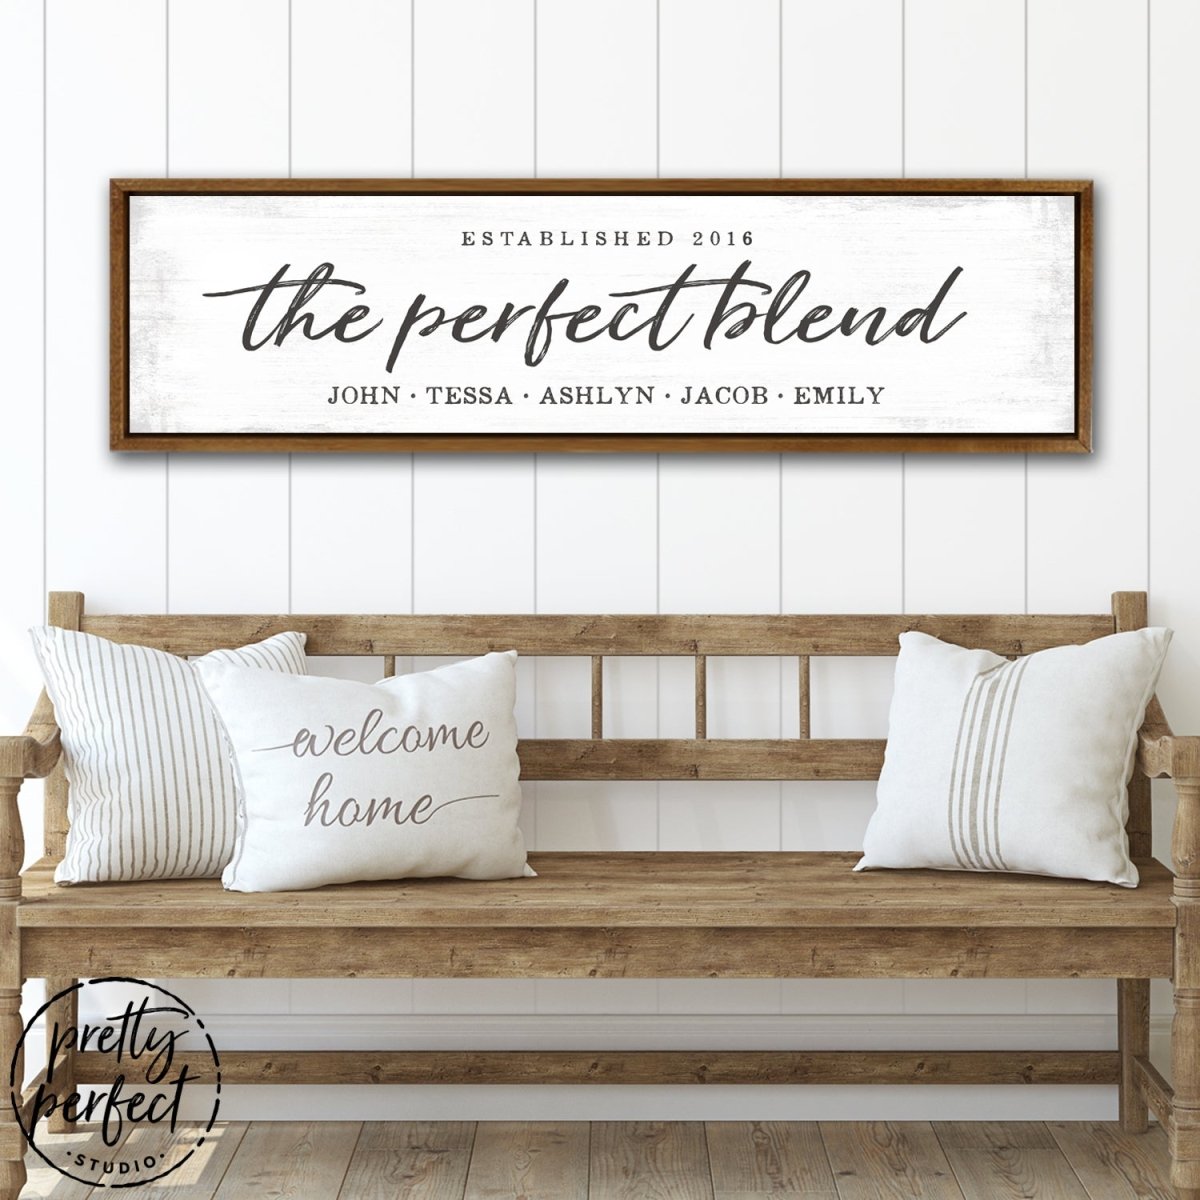 The Perfect Blend Personalized Name Sign With Established Date Above Entryway Bench - Pretty Perfect Studio